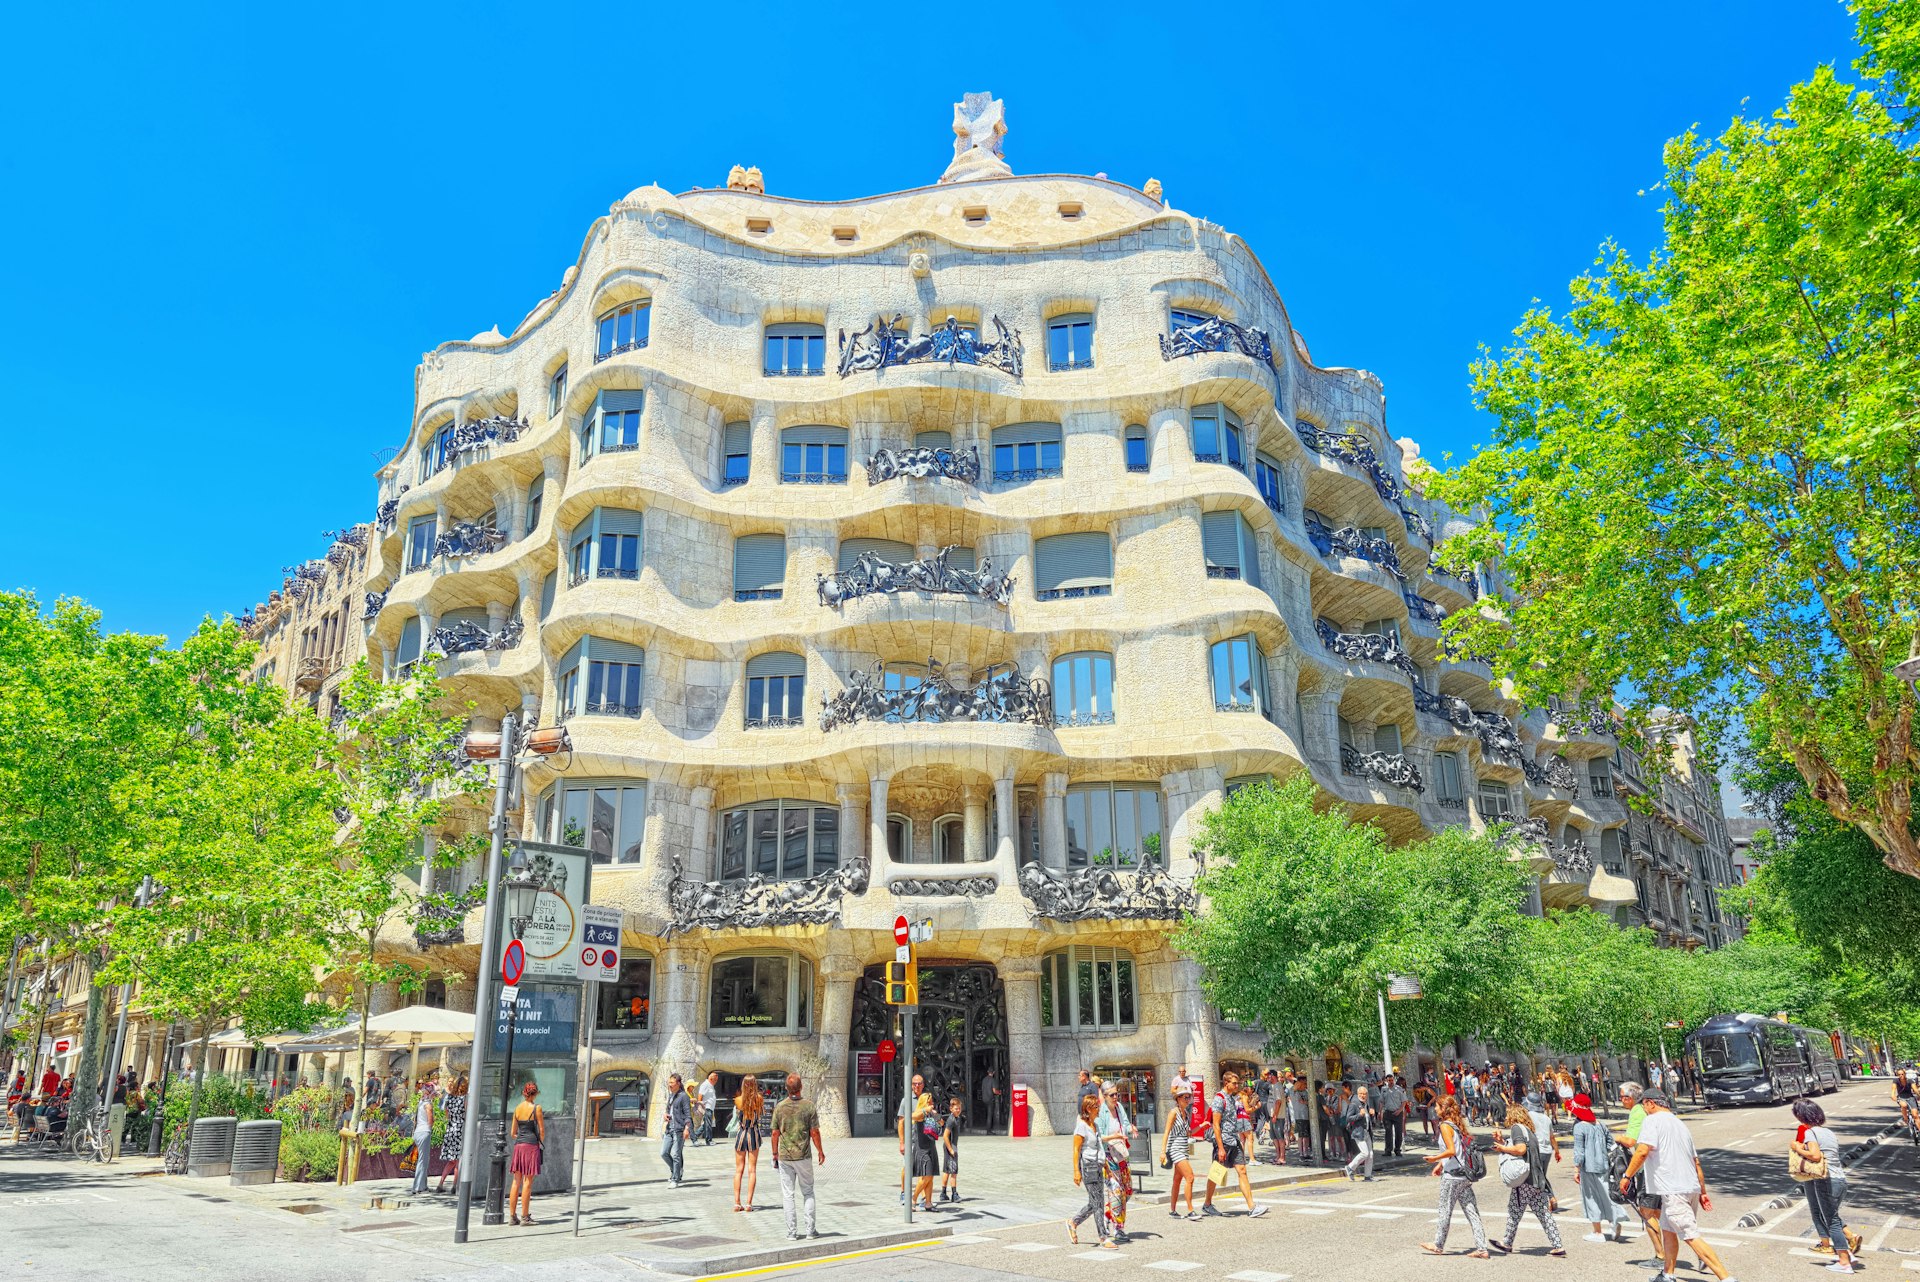 People on the sidewalk in front of Casa Milà, popularly known as La Pedrera, Barcelona, Catalonia, Spain